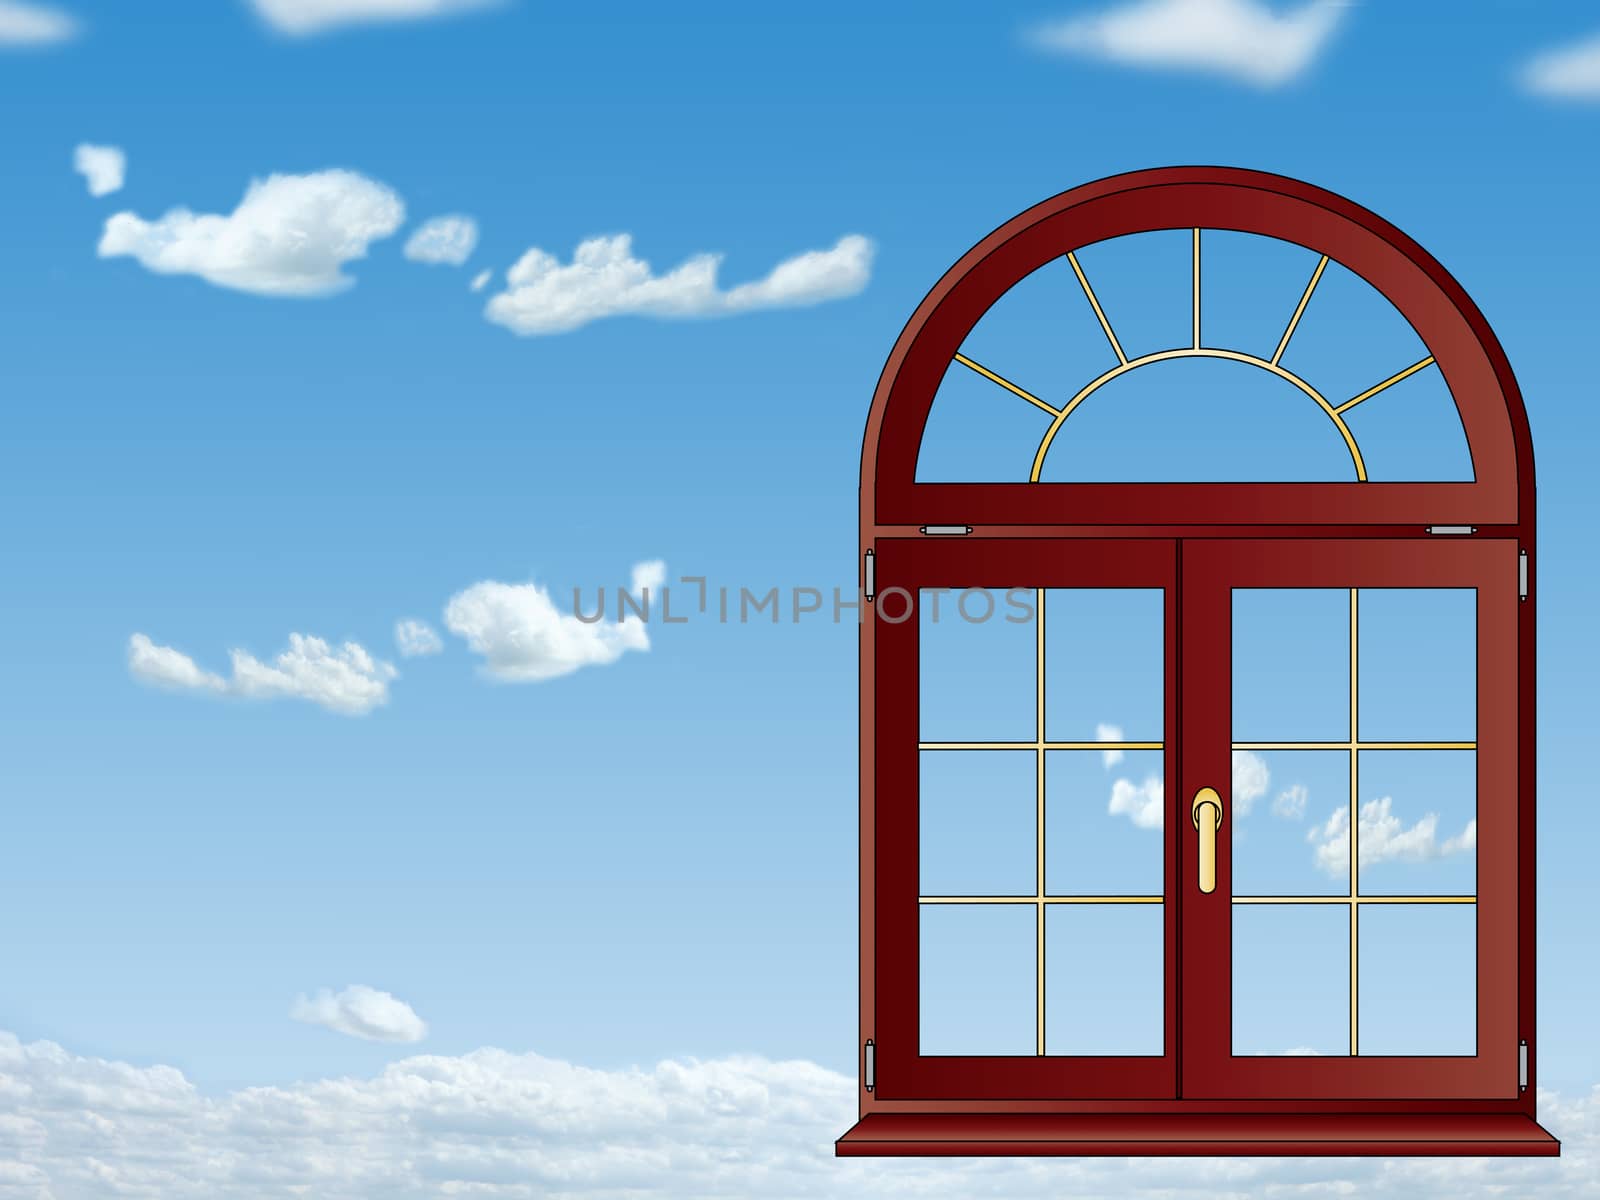 Window in the sky by EugenP